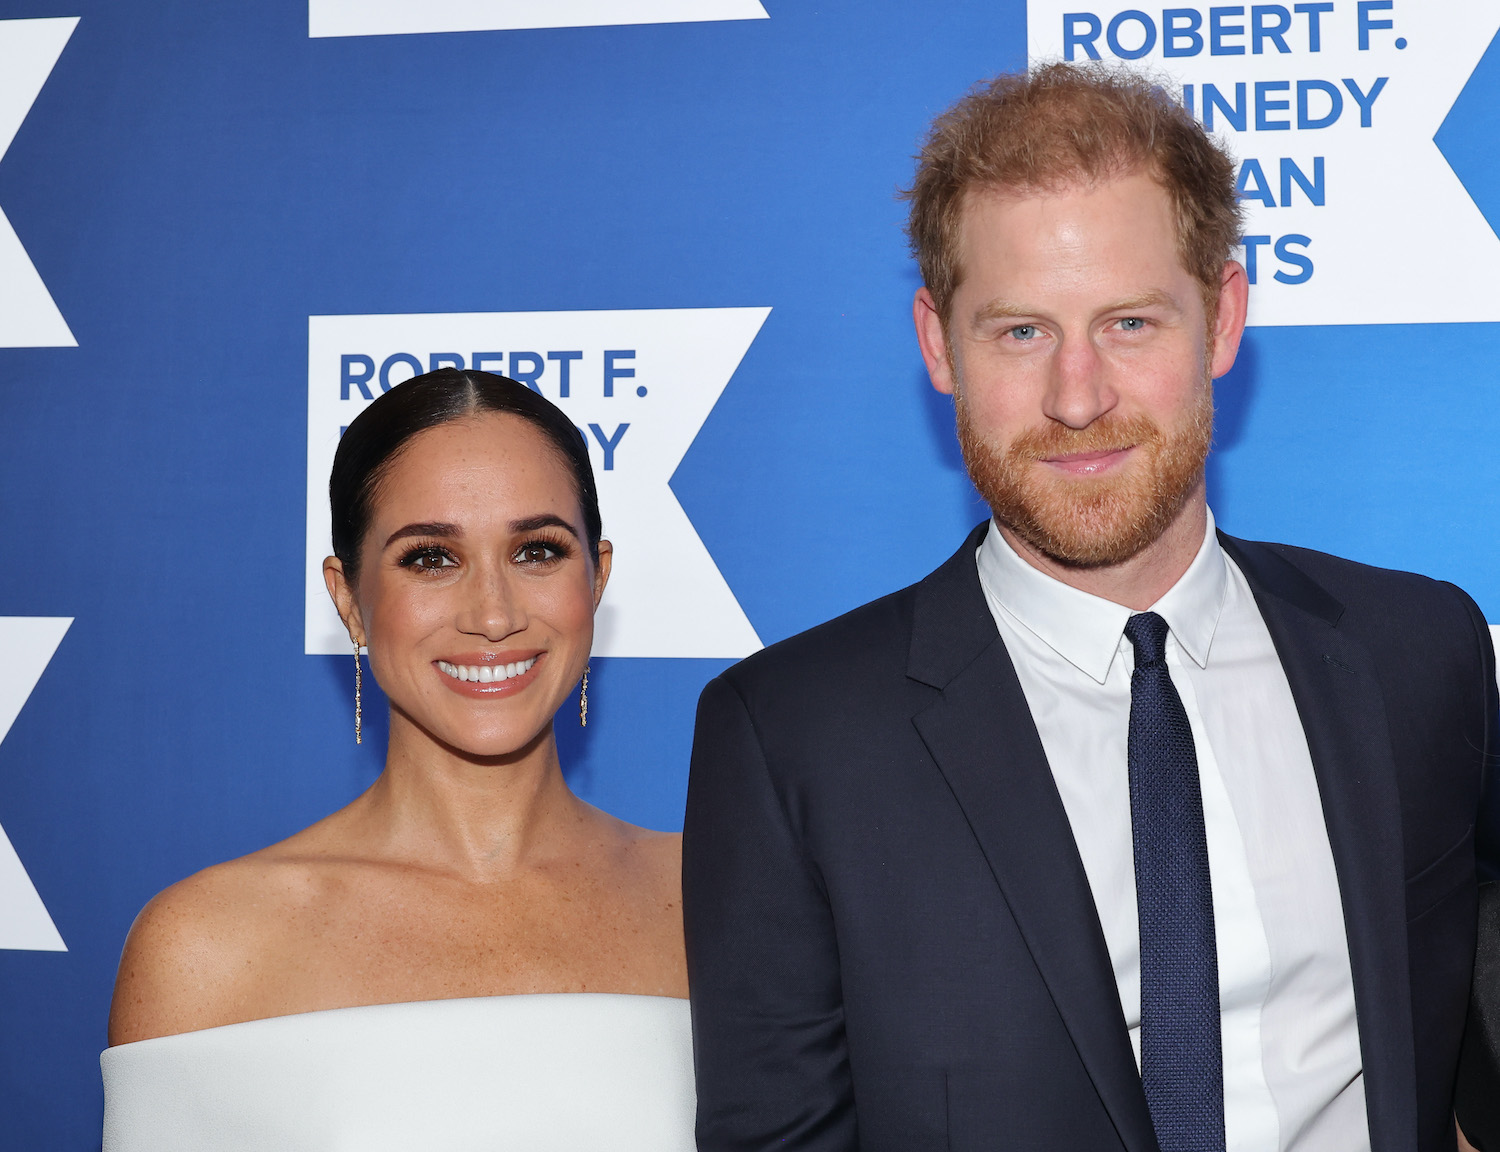 Prince Harry and Meghan Markle body language at Ripple of Hope Awards conveyed confidence and excitement